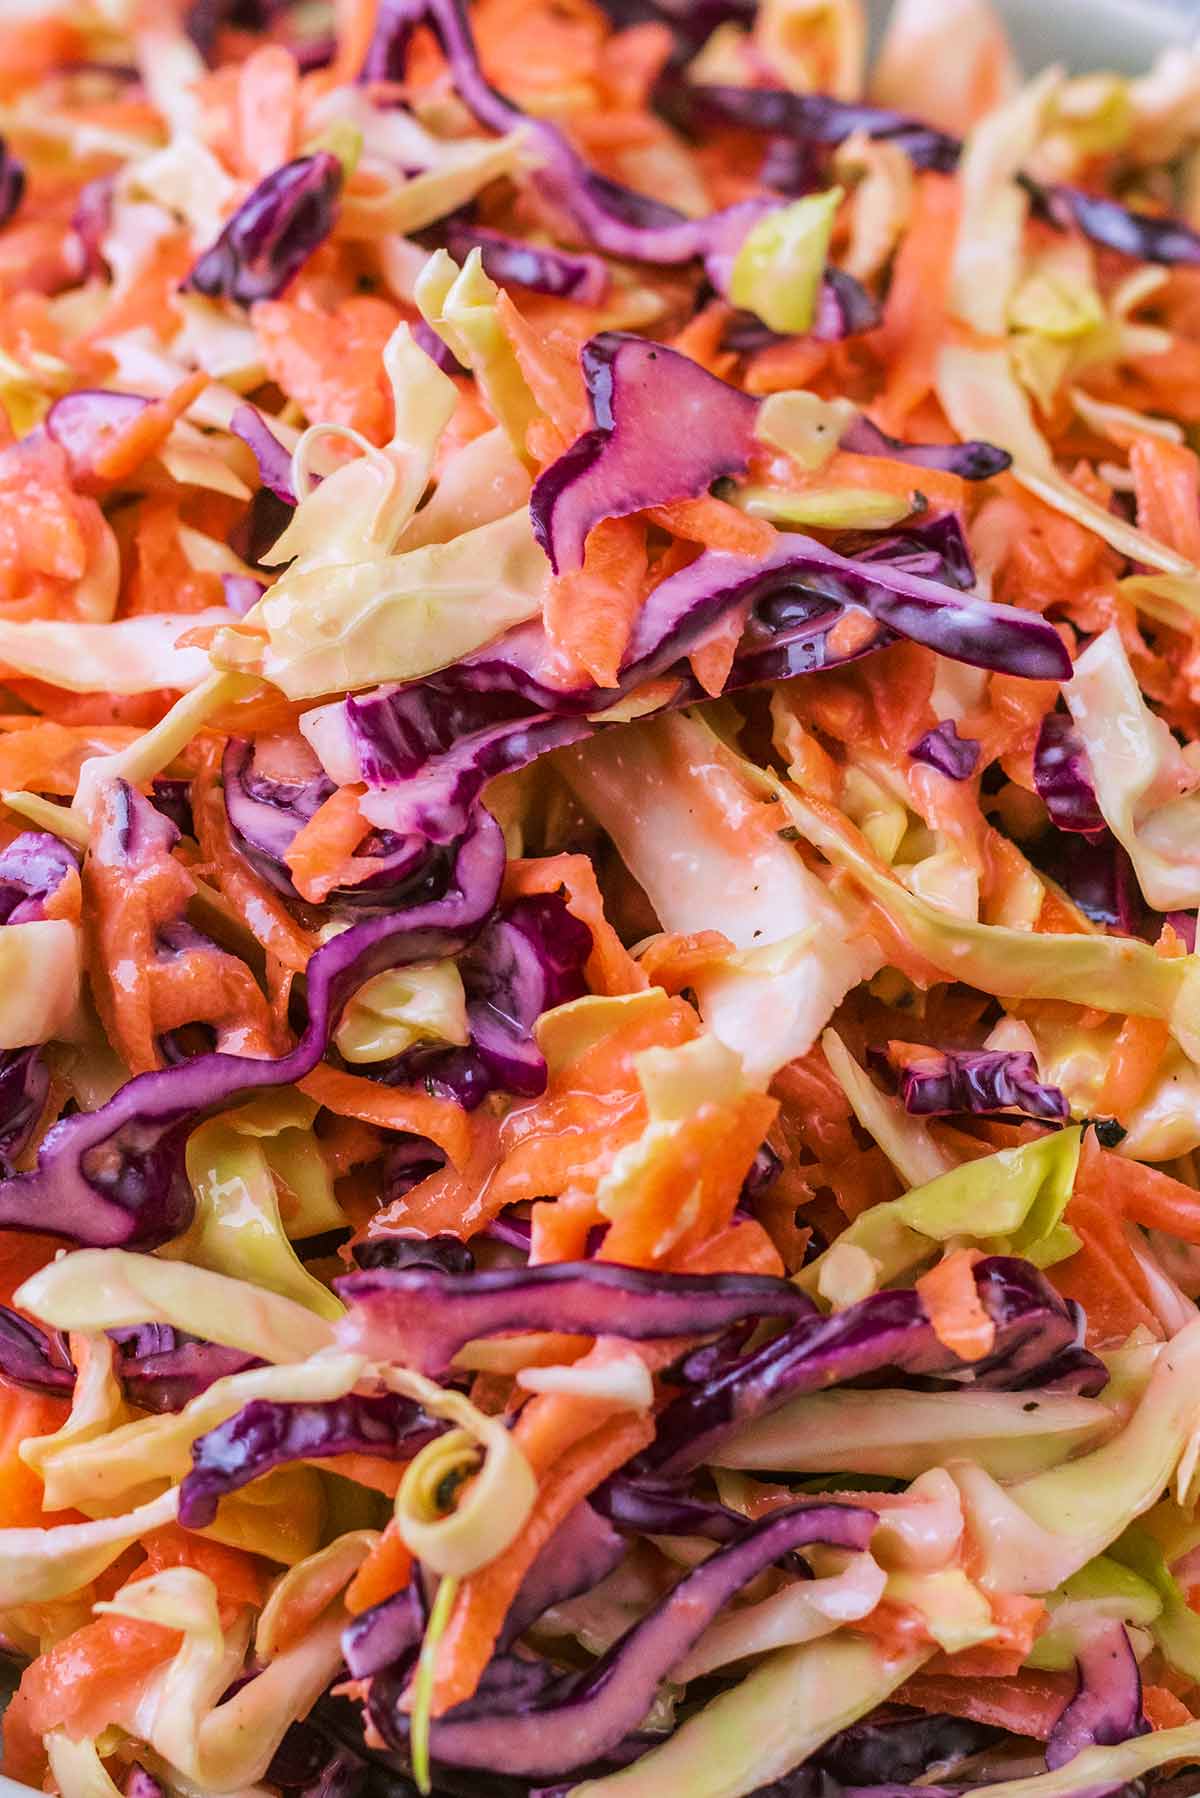 Shredded red and white cabbage and shredded carrot all mixed together.